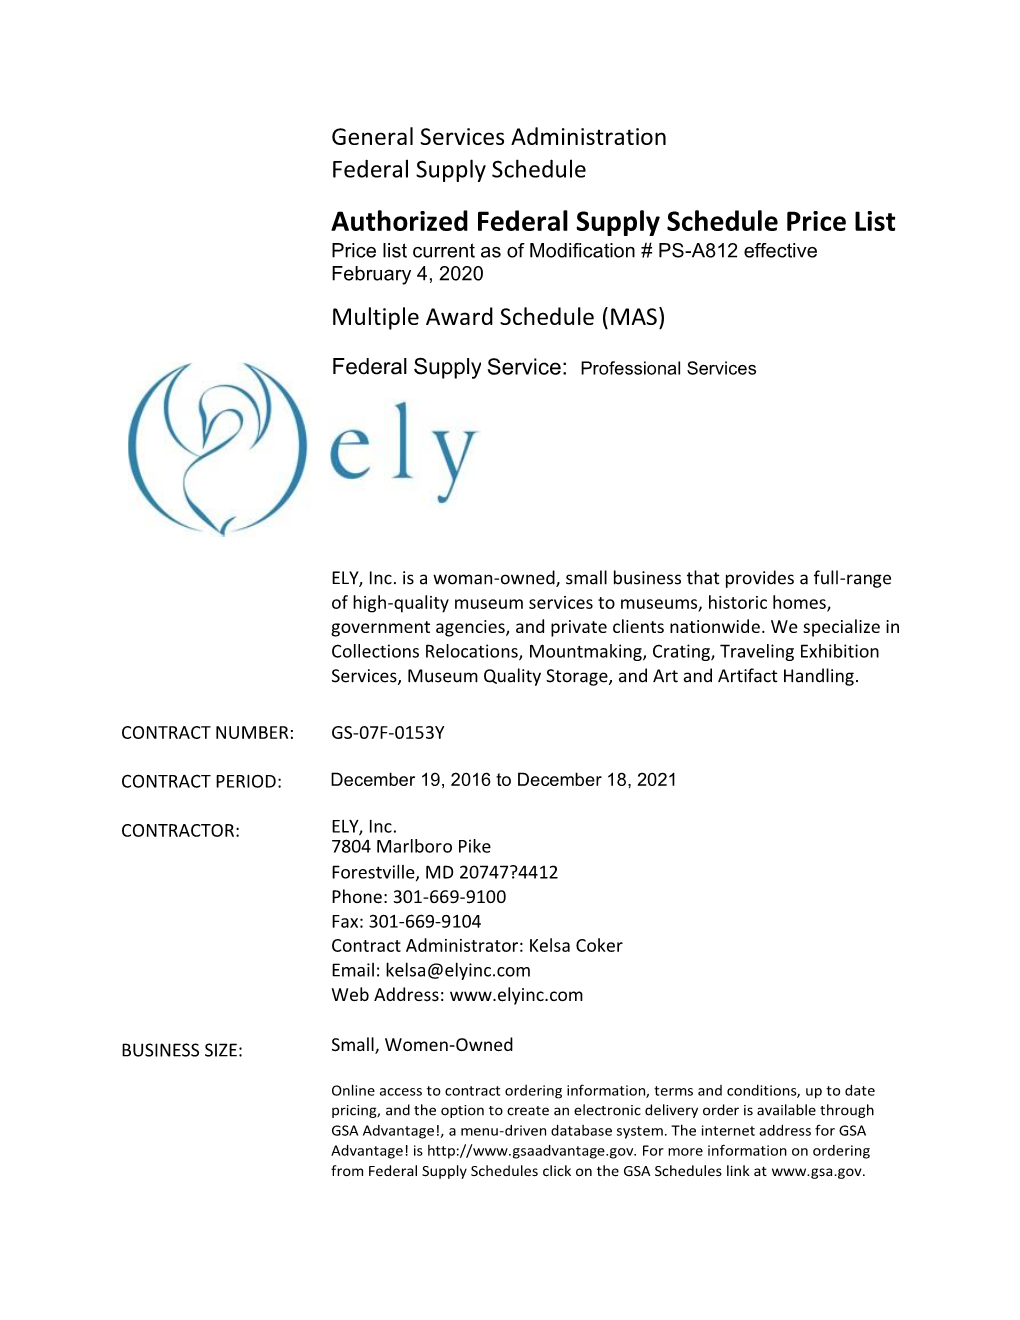 Authorized Federal Supply Schedule Price List Price List Current As of Modification # PS-A812 Effective February 4, 2020 Multiple Award Schedule (MAS)